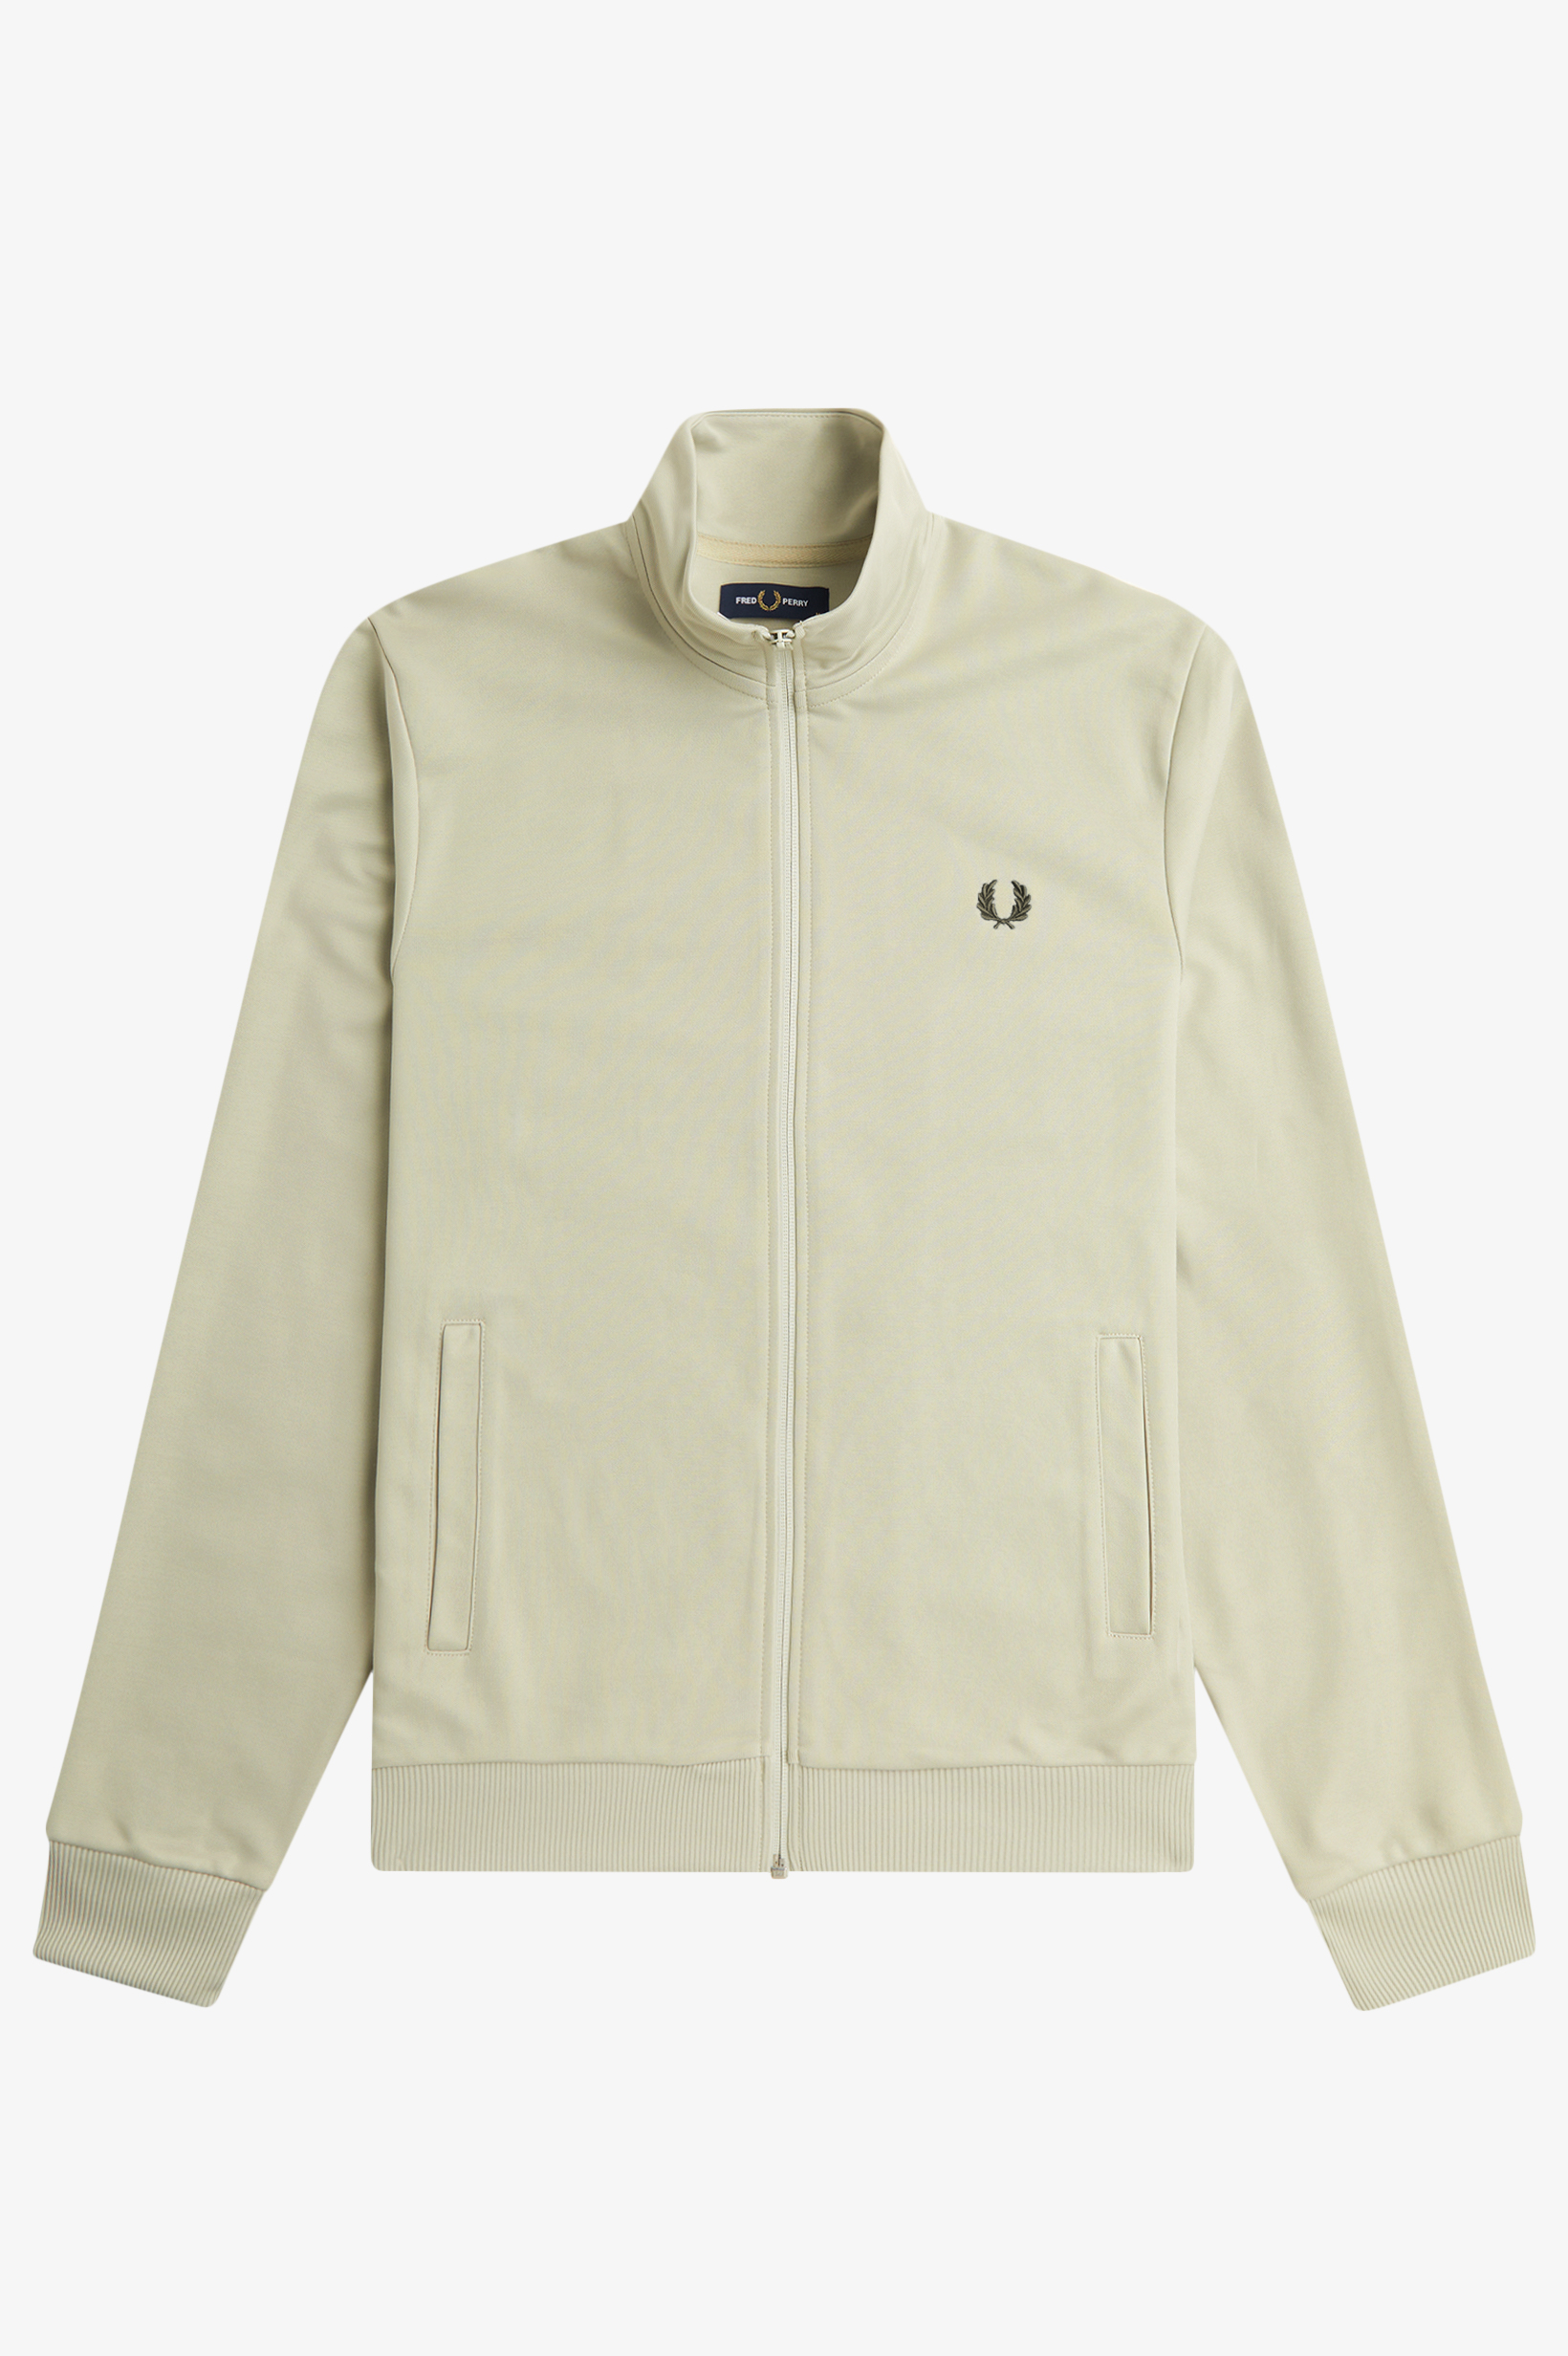 Fred Perry - TRACK JACKET - Light Oyster